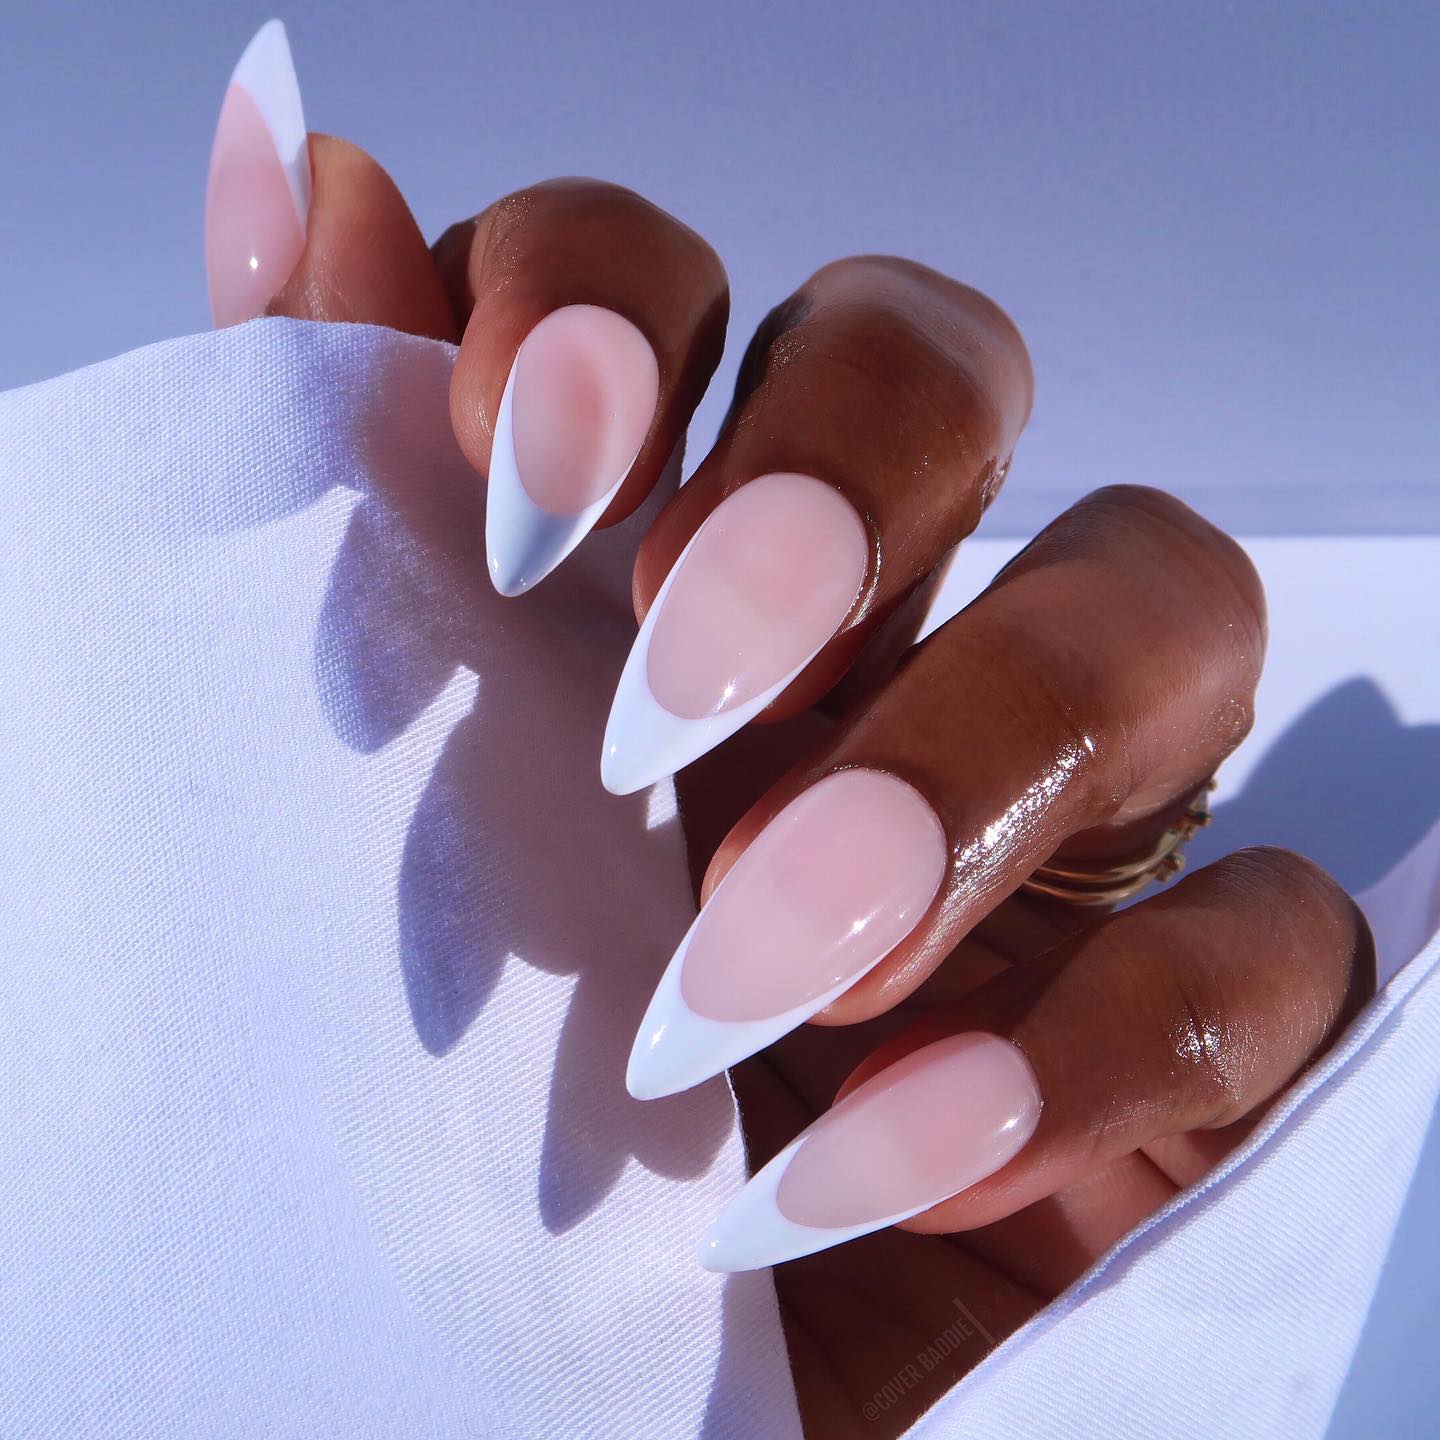 Classy French Tips on Stiletto Nails